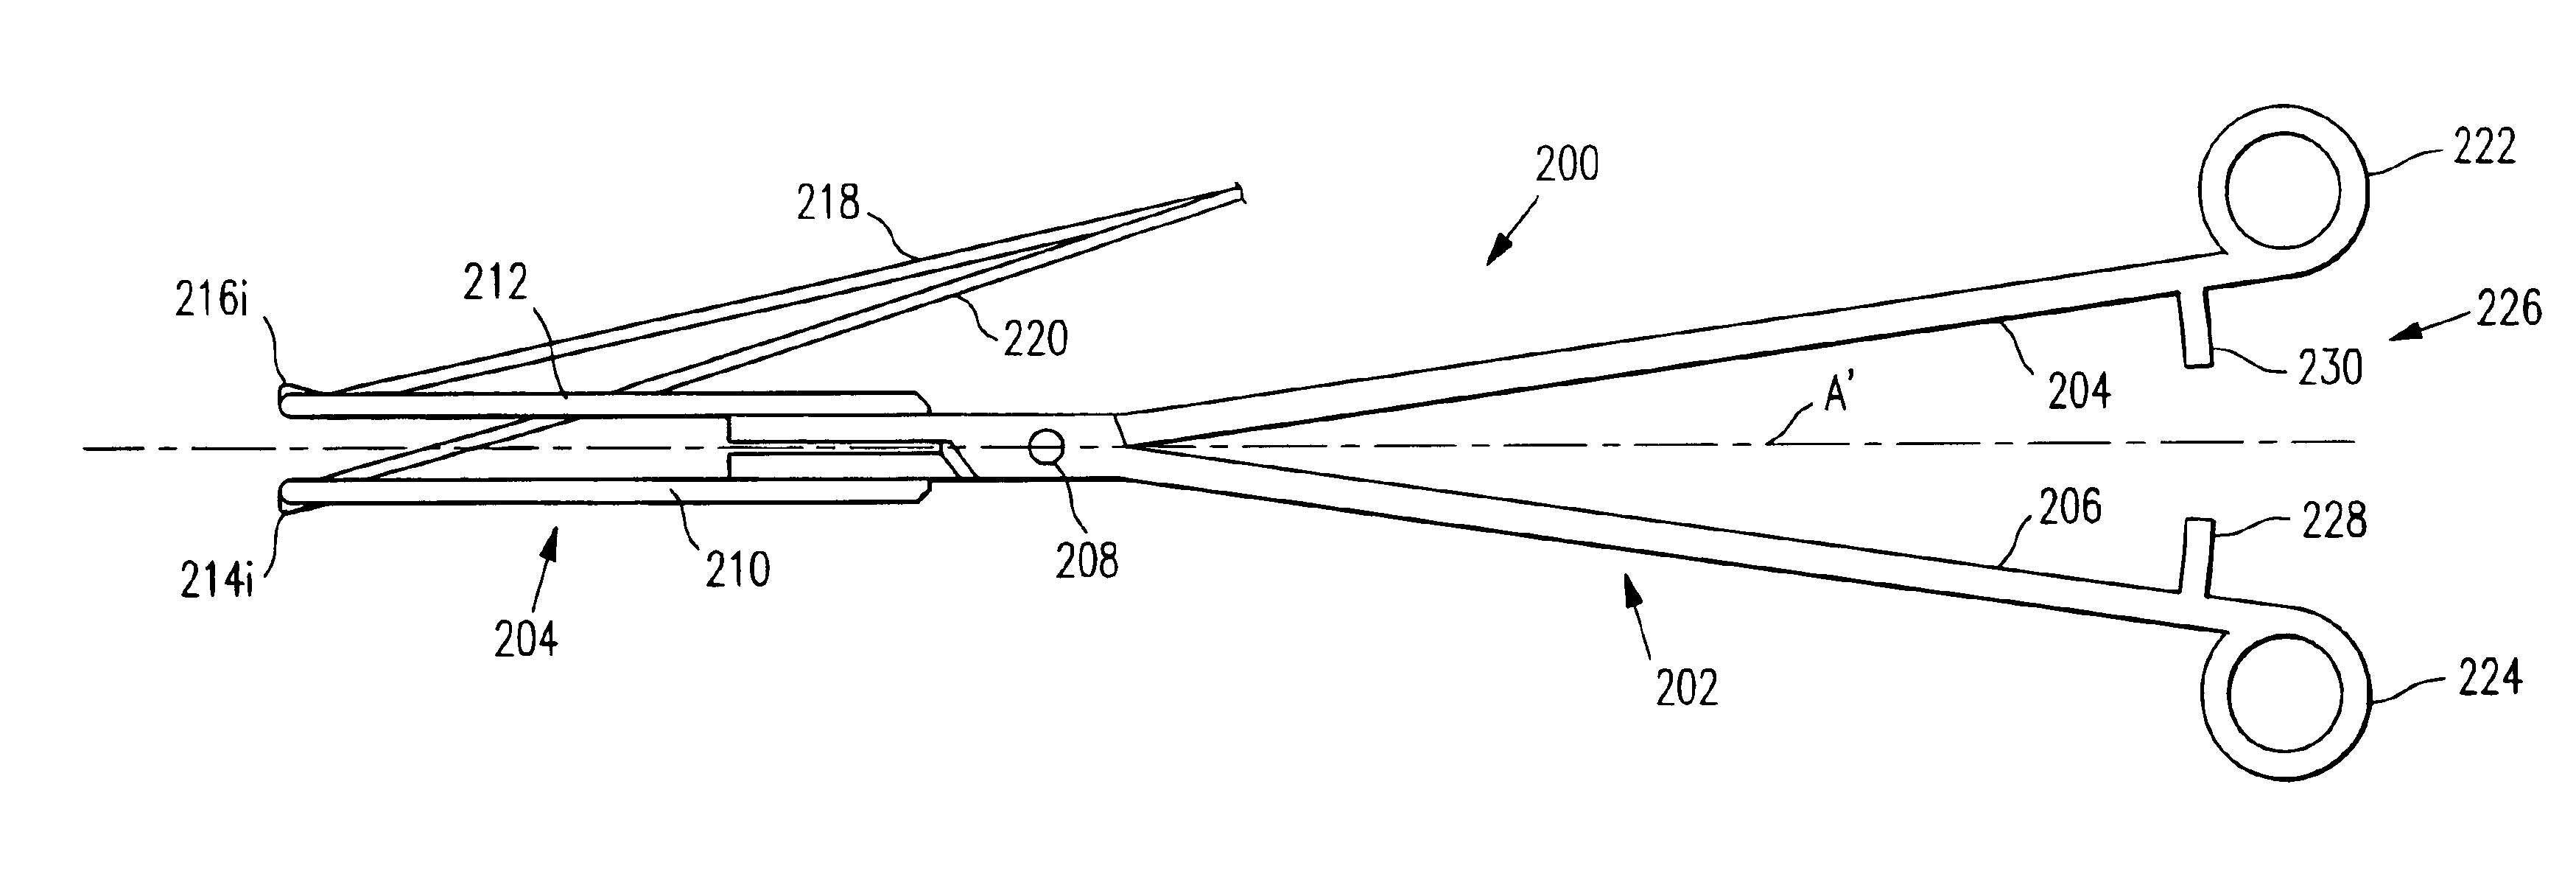 Multi-axial uterine artery identification, characterization, and occlusion pivoting devices and methods